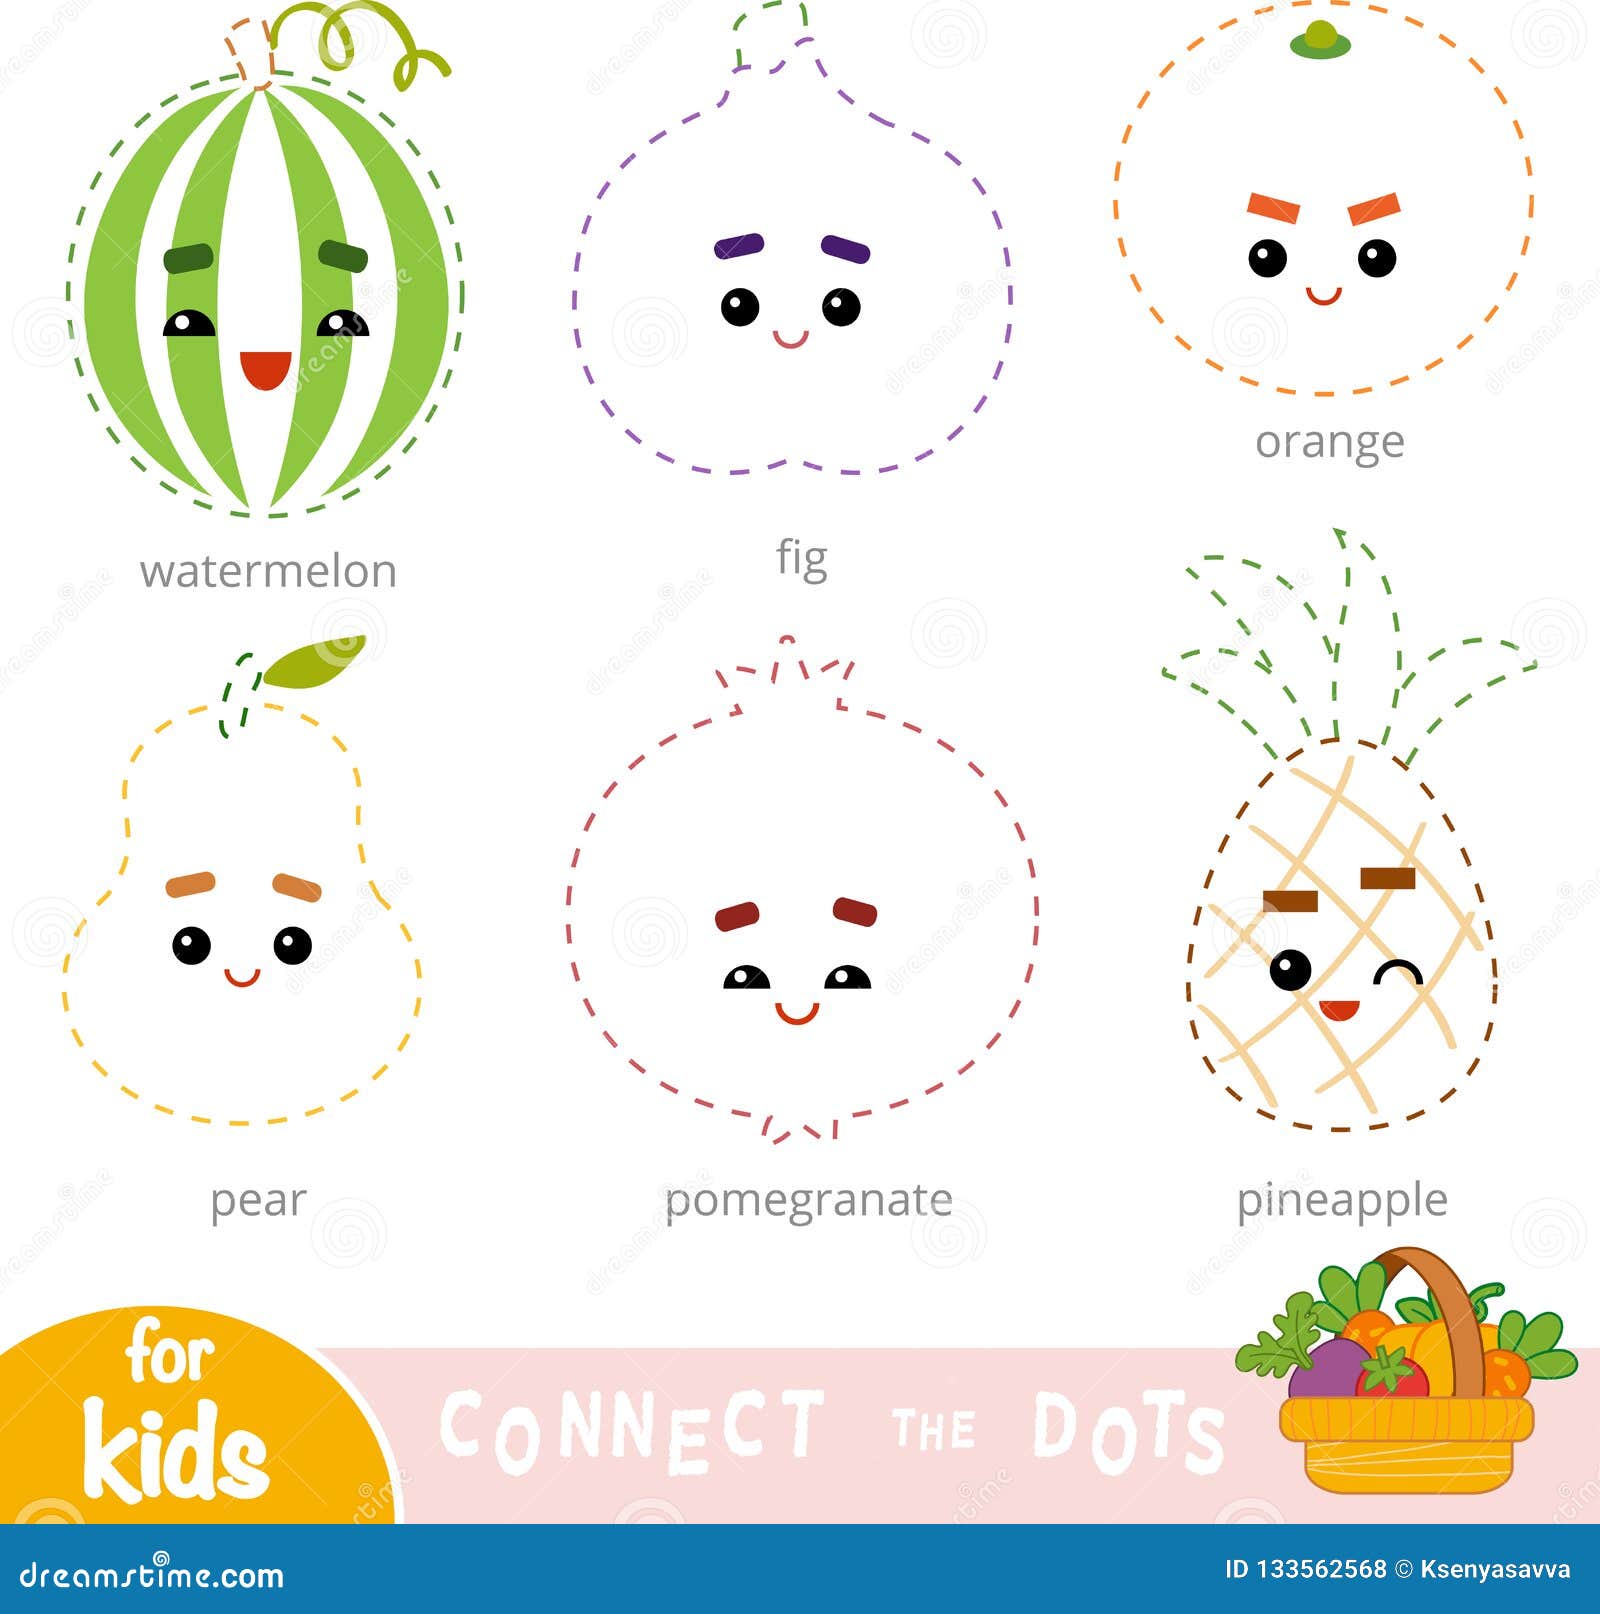 connect the dots, game for children. set of cartoon fruits